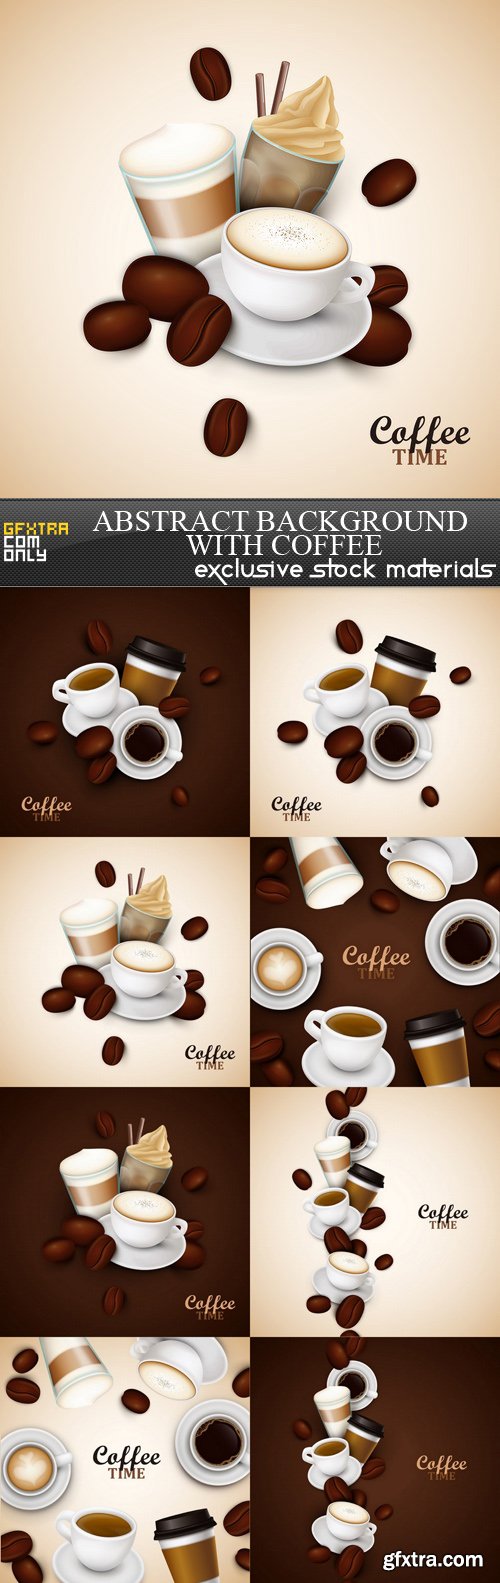 Abstract Background with Coffee - 8 EPS